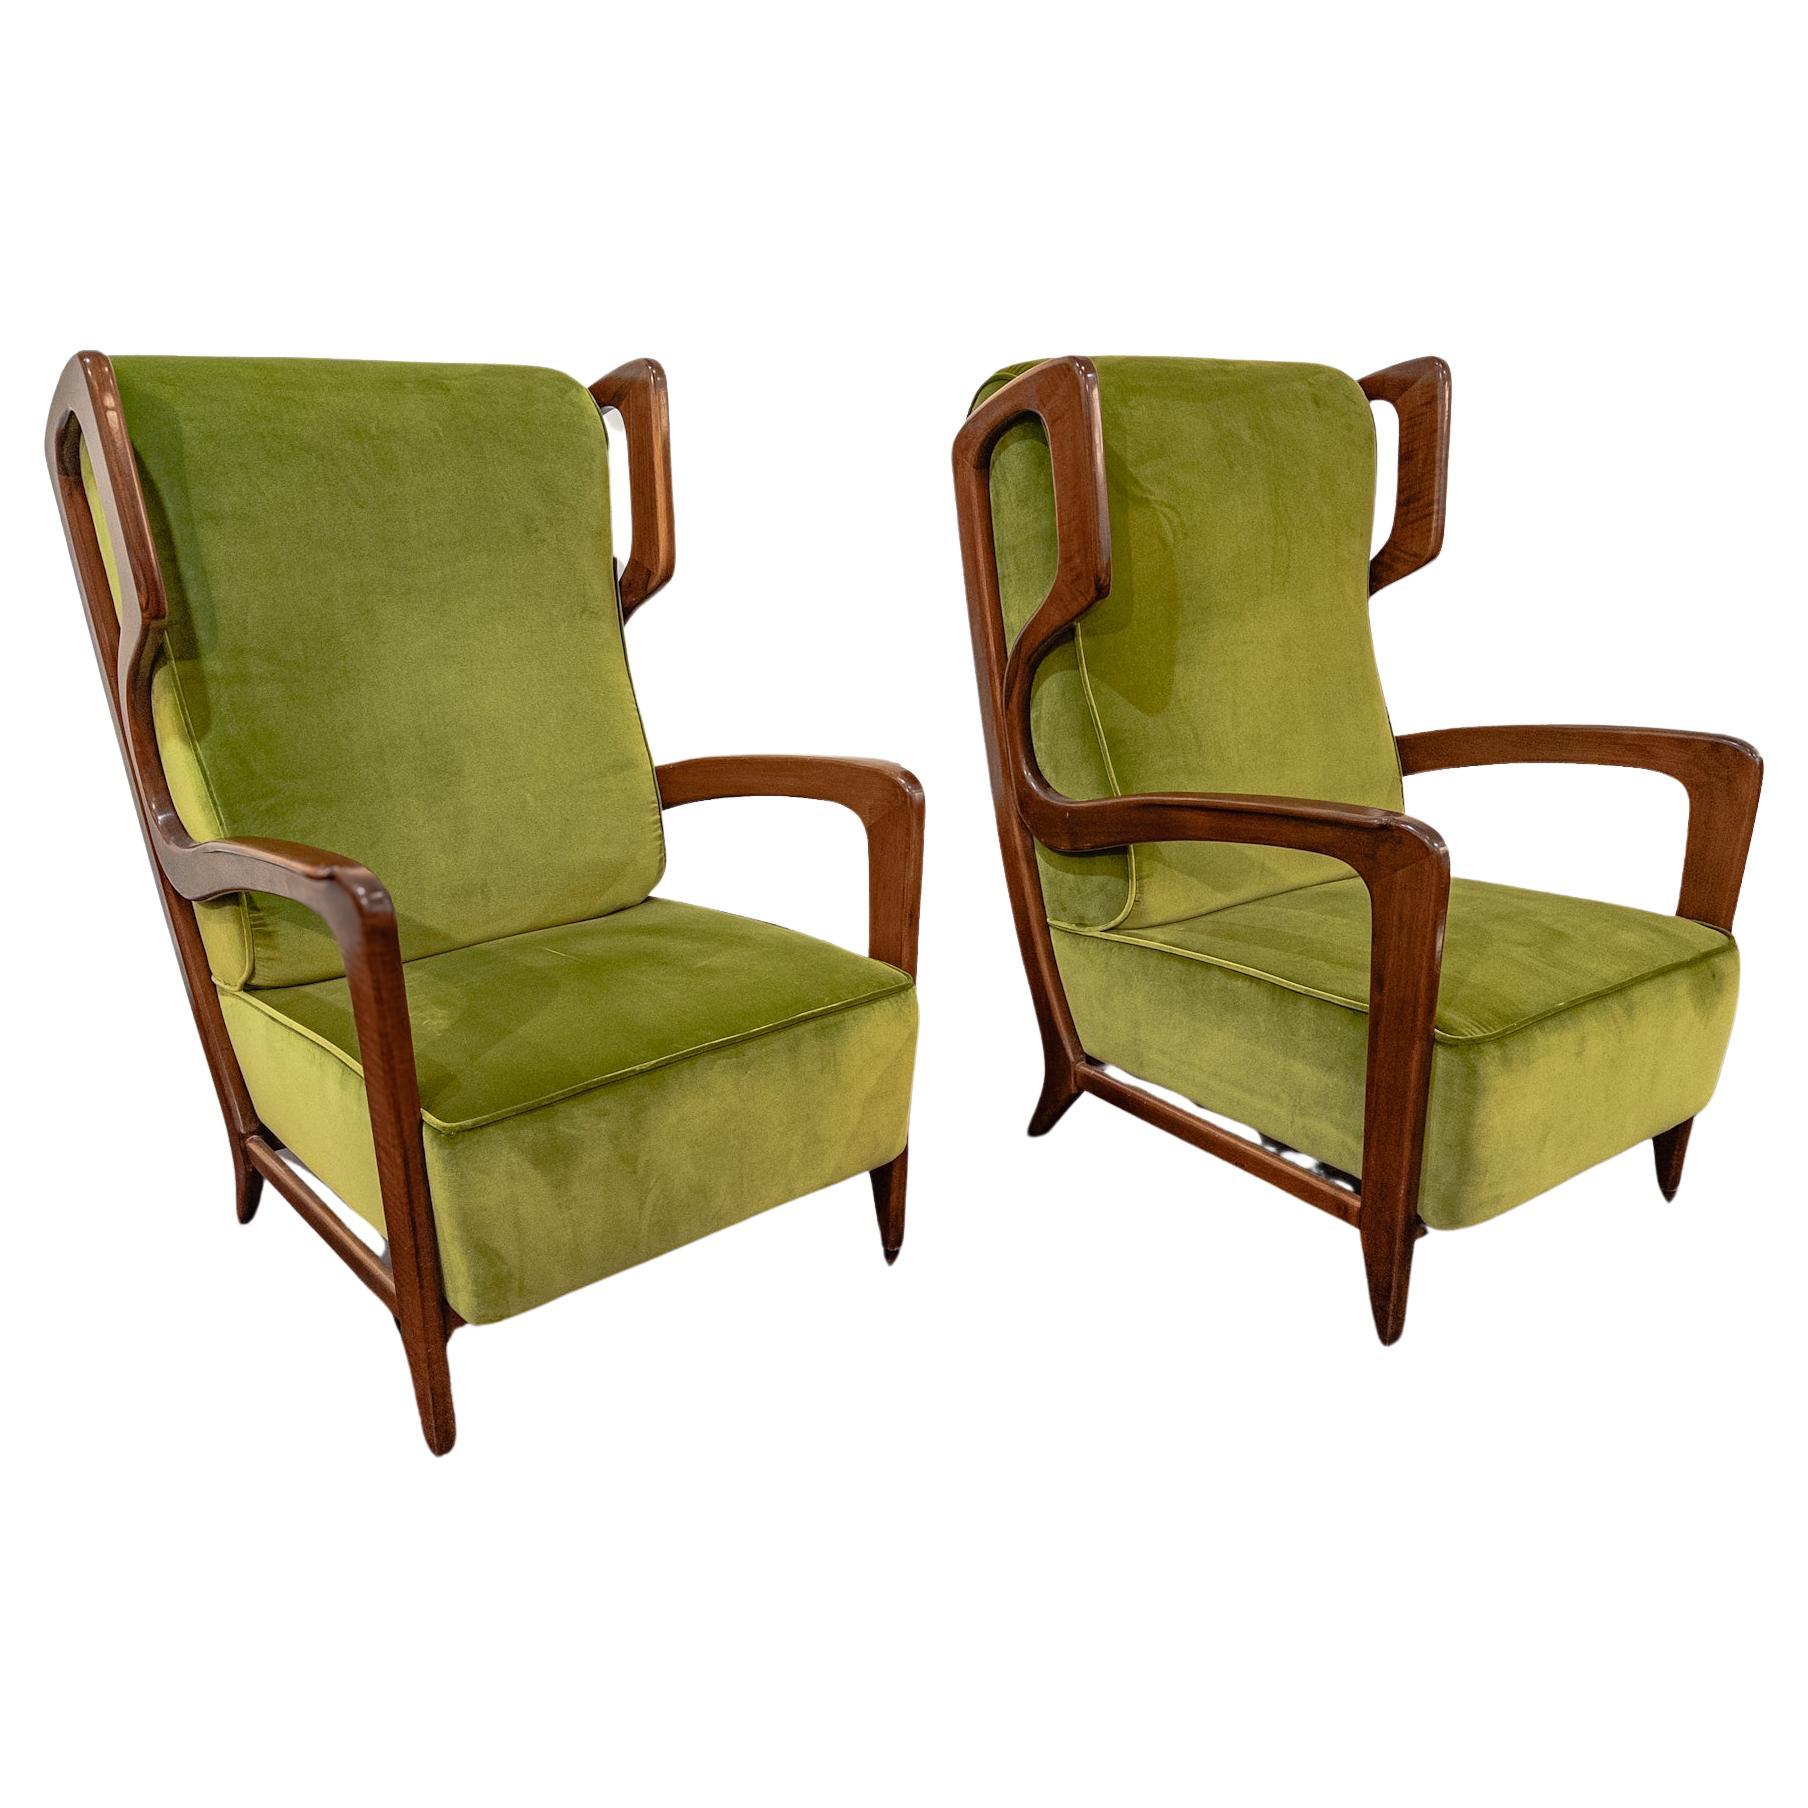 Pair Of Gio Ponti Lounge Chairs For Sale